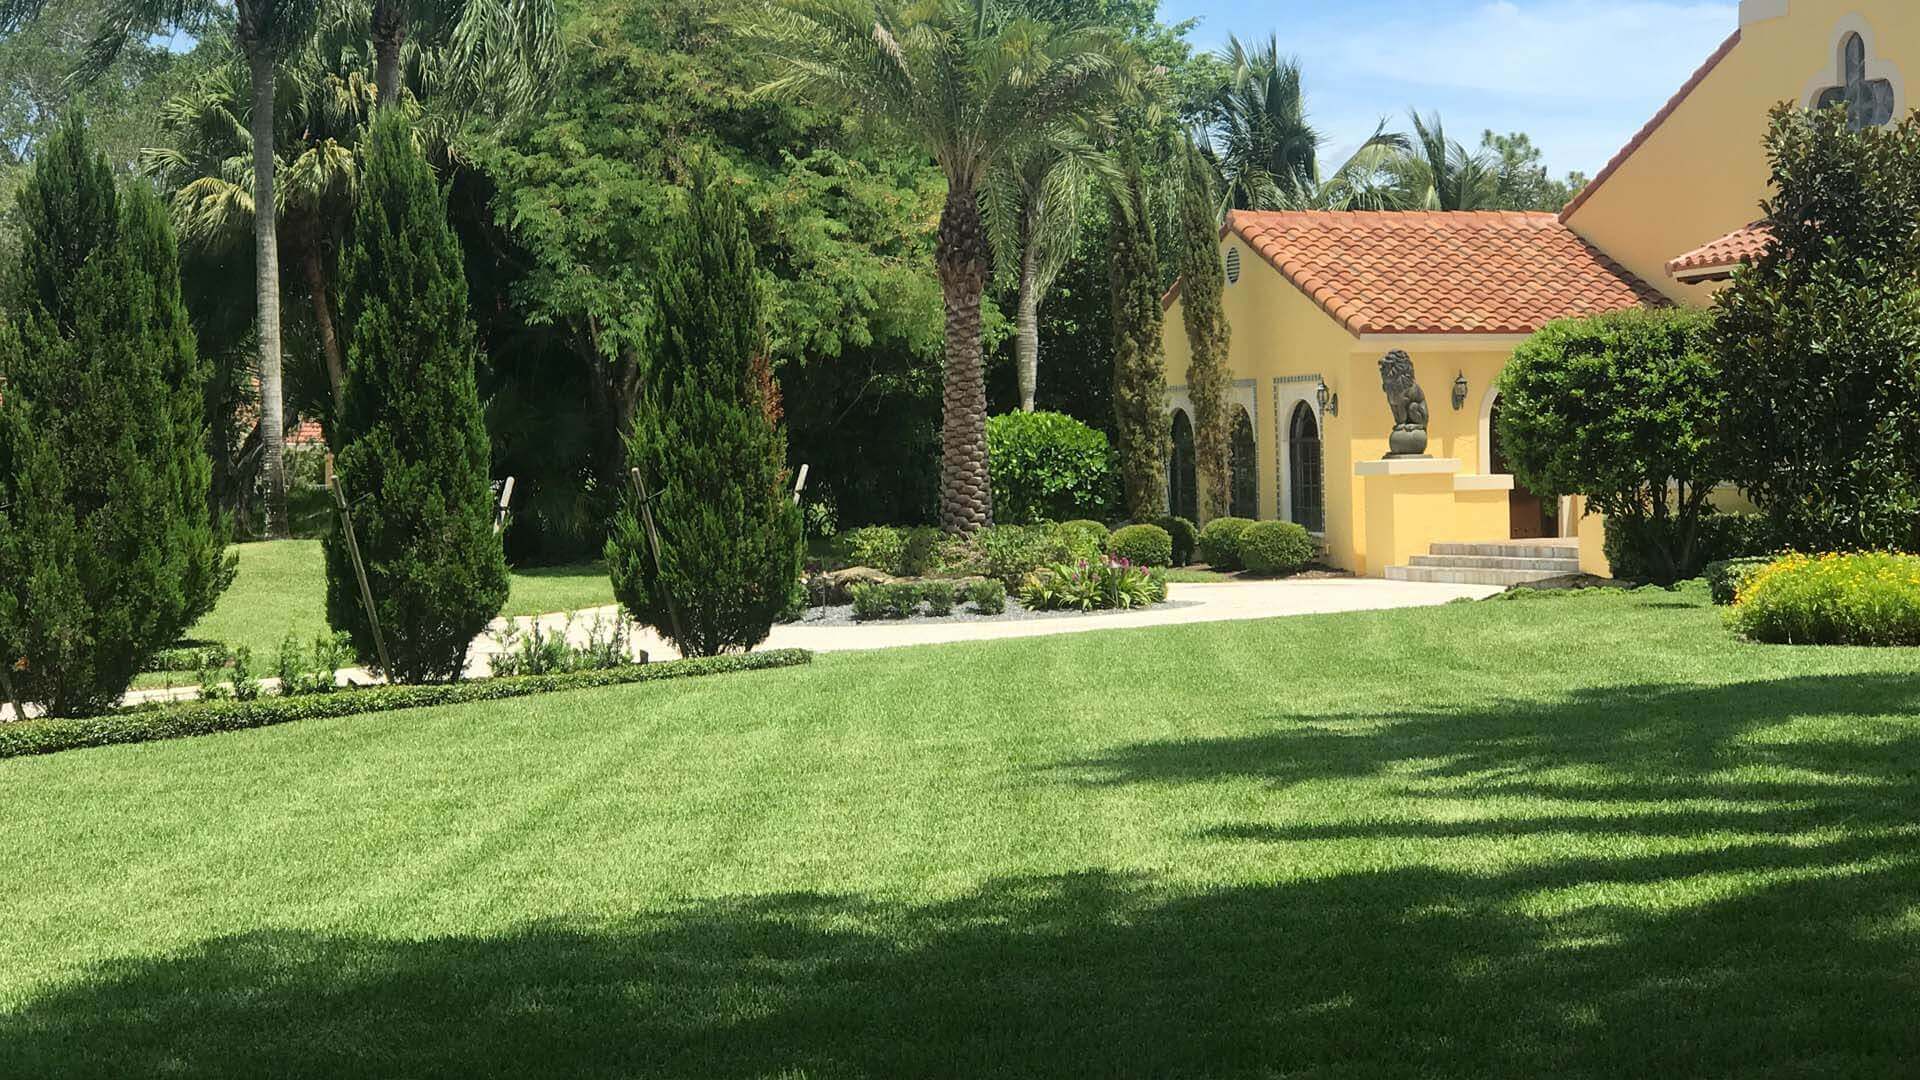 Lawn mowing and landscape maintenance at a residential estate in Fort Lauderdale, FL